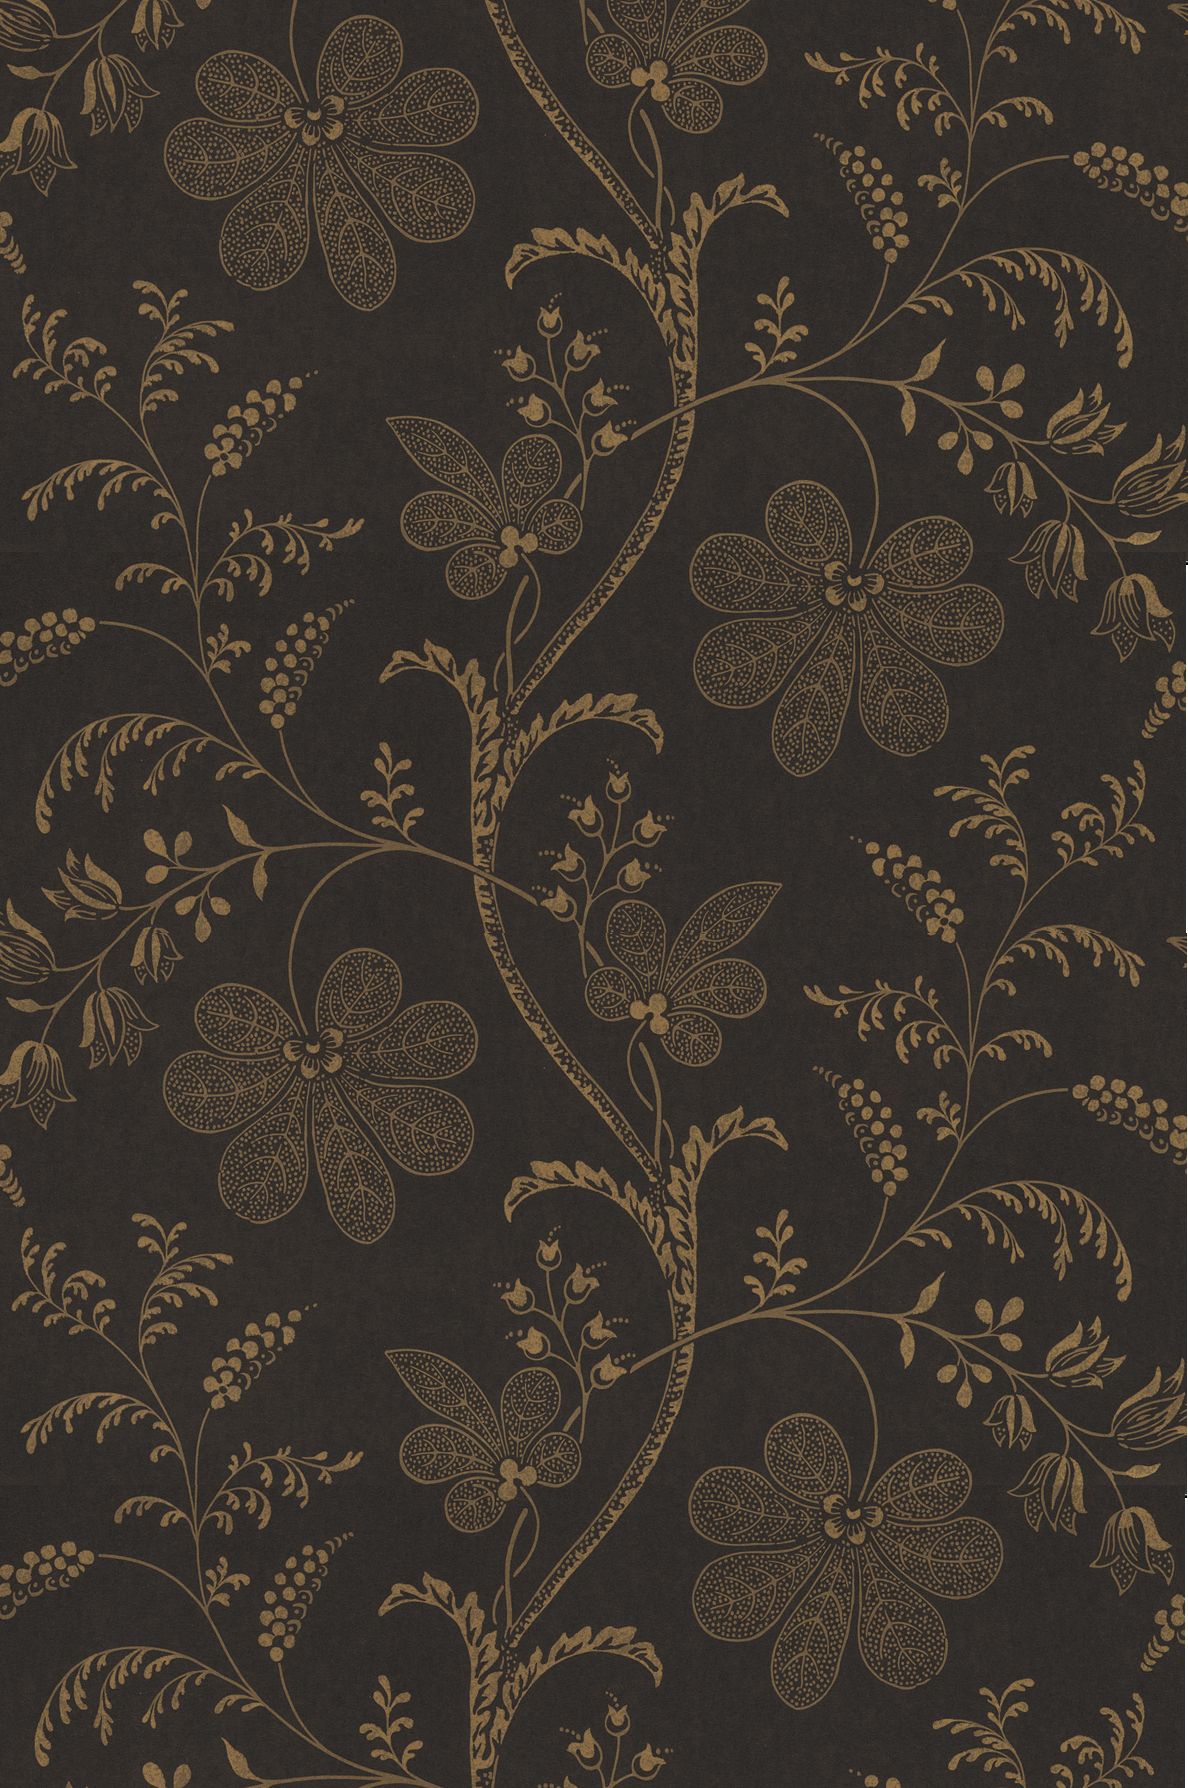 Bedford Square Wallpaper by Little Greene in Ebony Gold | TM Interiors ...